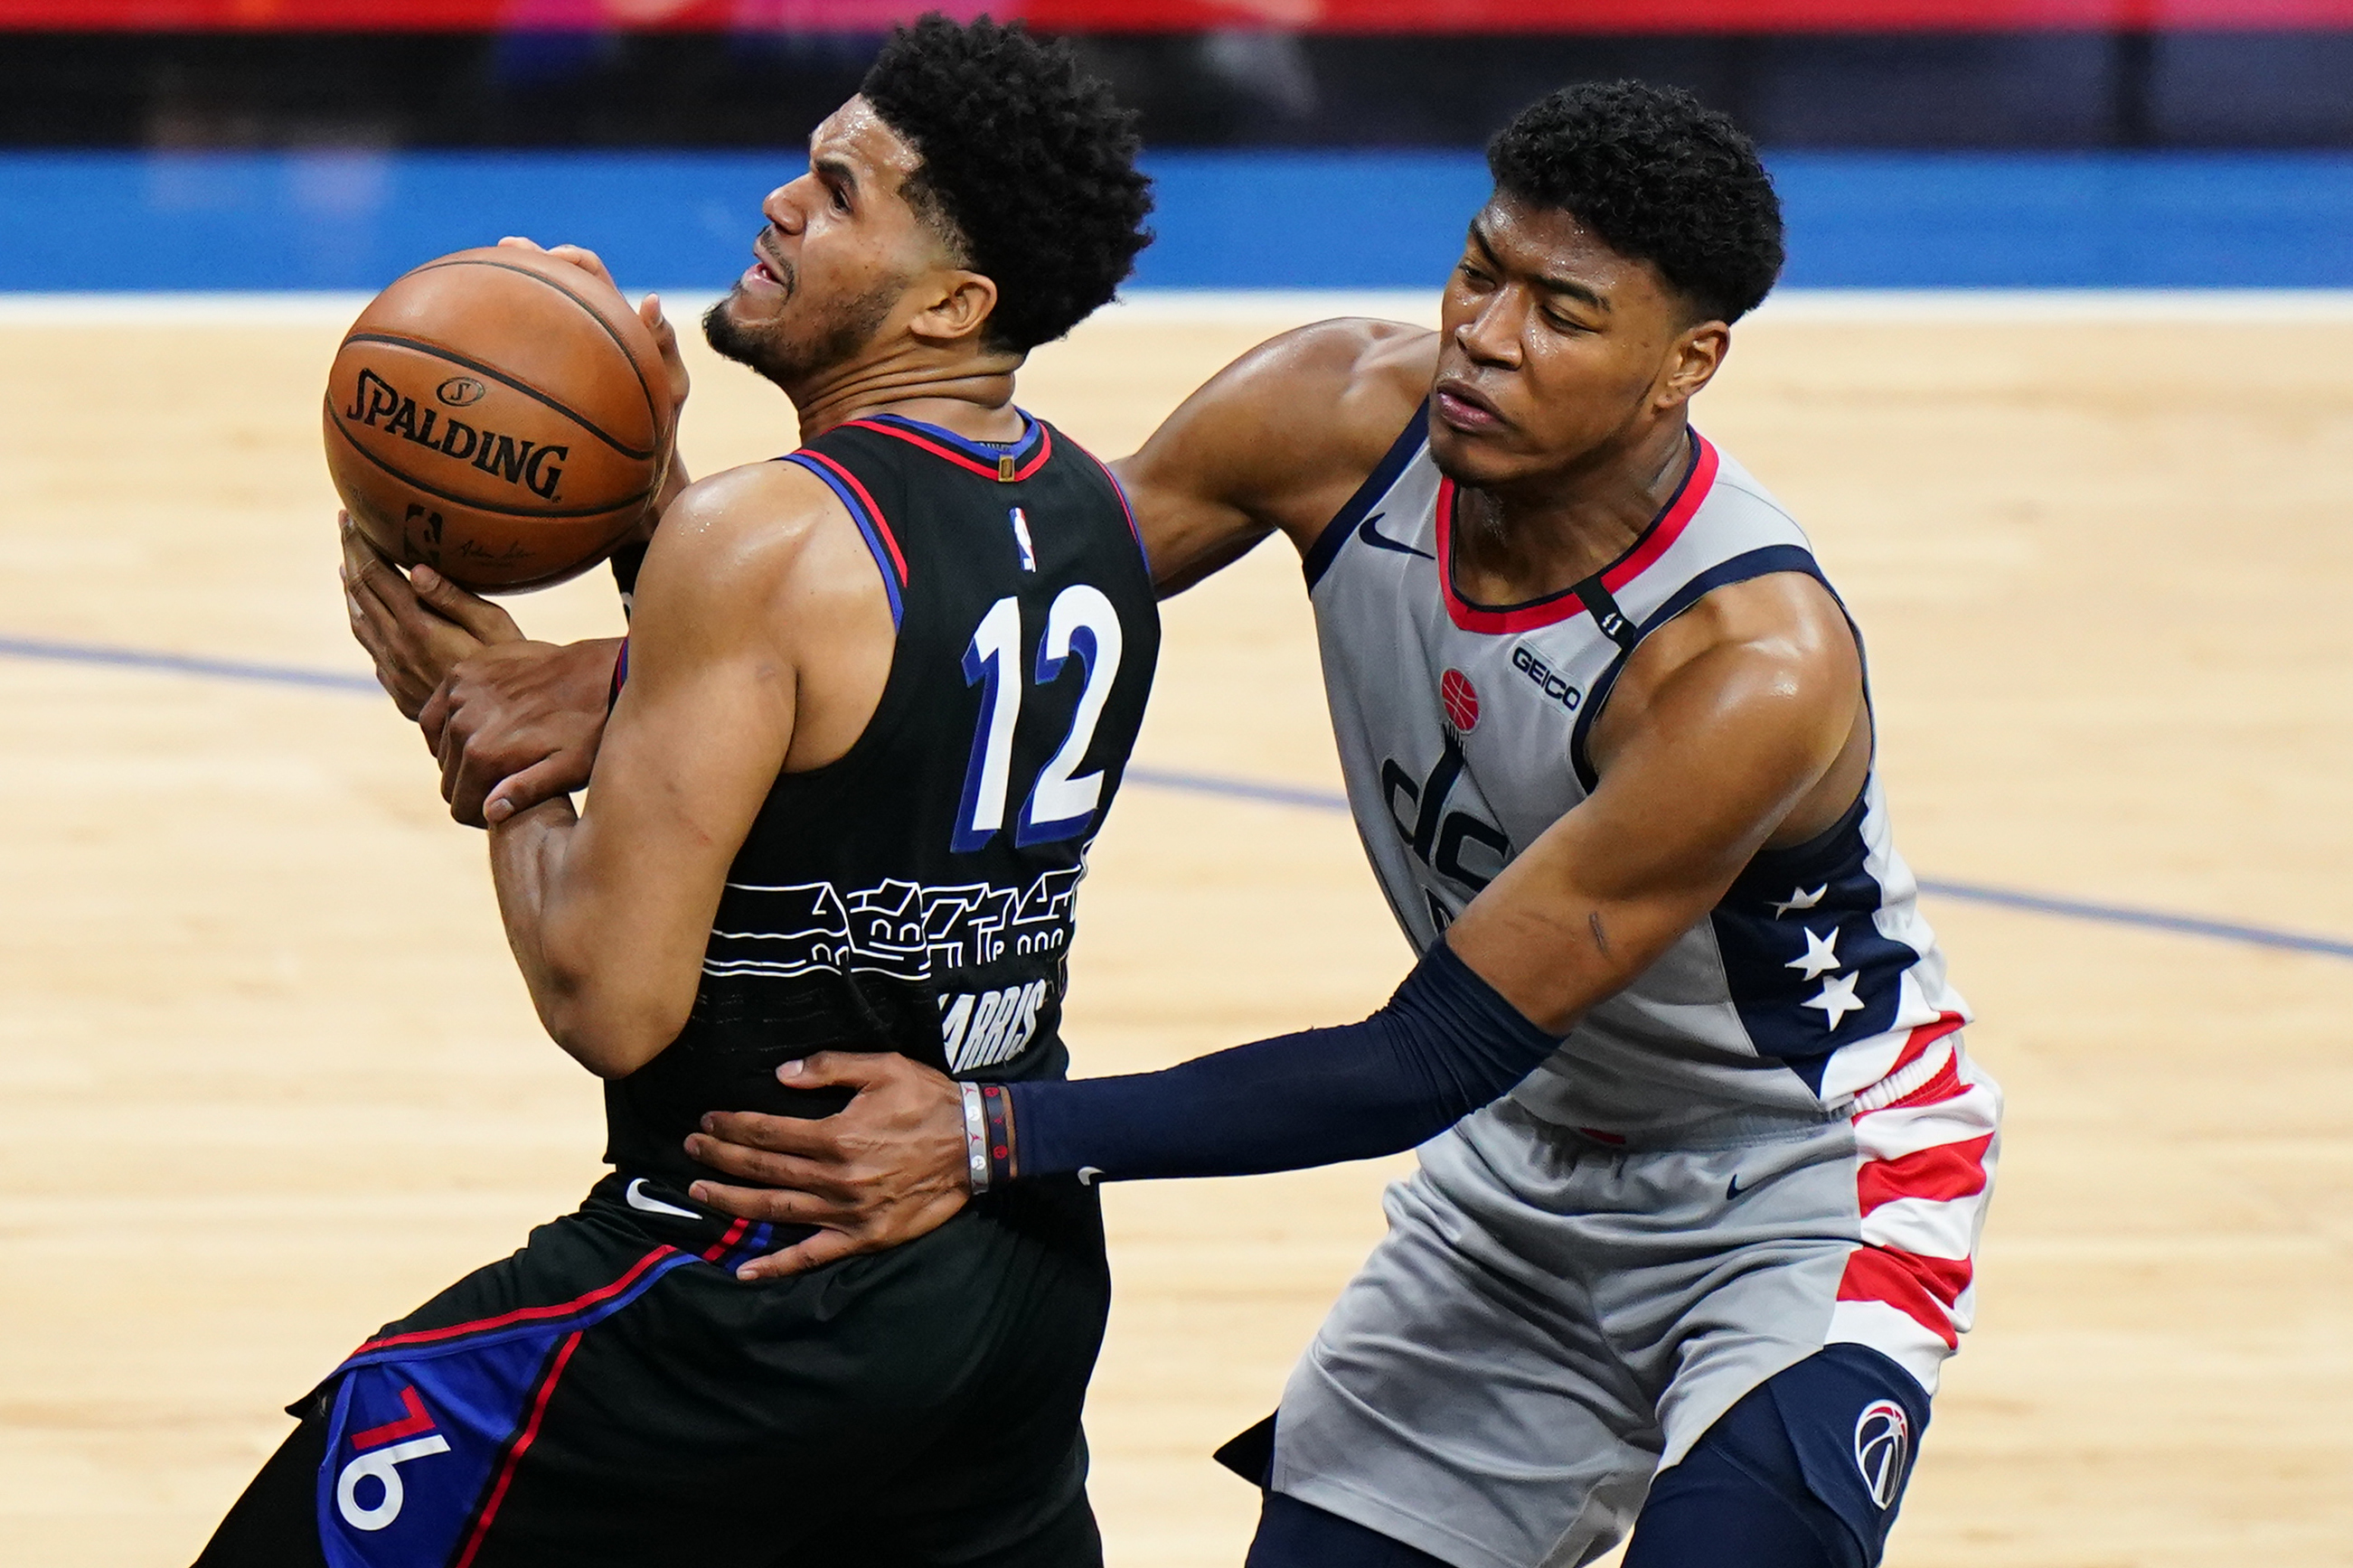 Washington Wizards at Philadelphia 76ers Game 2 free live stream (5/26/21) How to watch NBA, time, channel